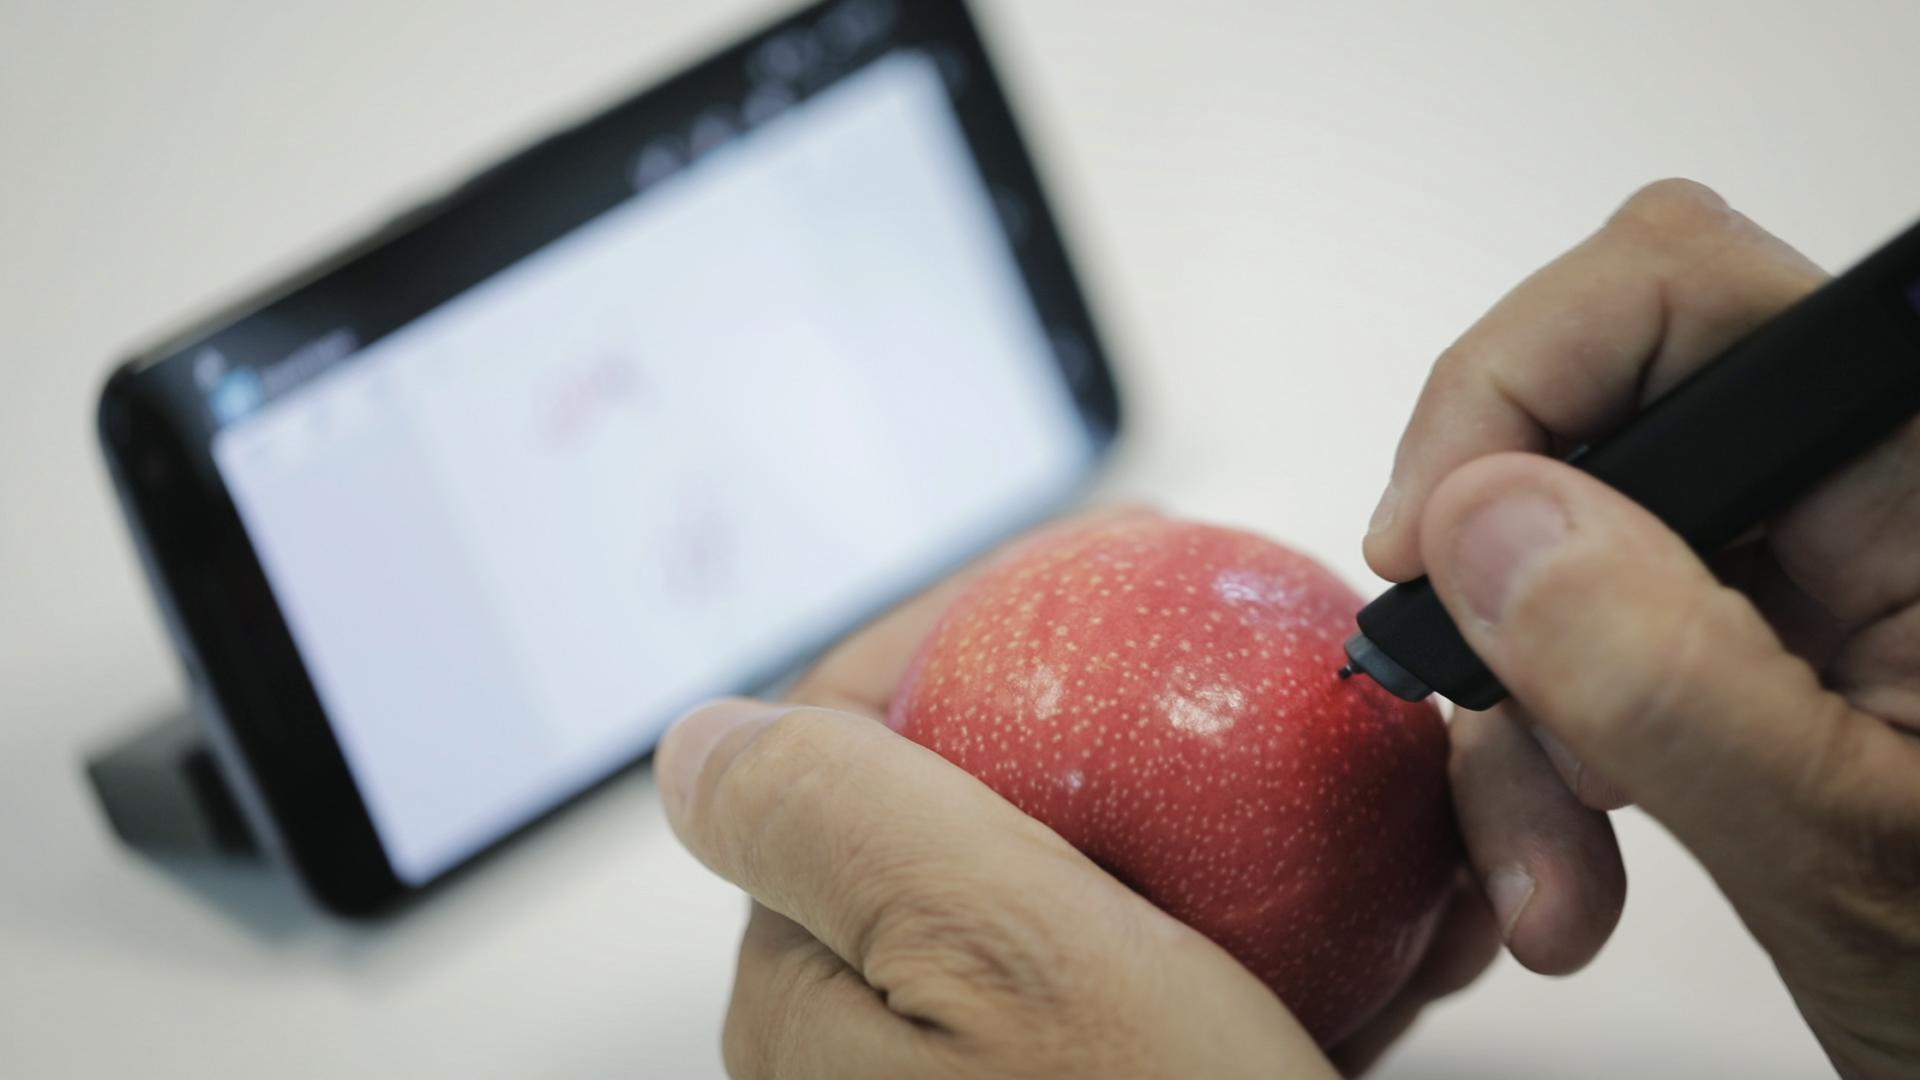 Phree is a digital stylus that works on any surface - almost